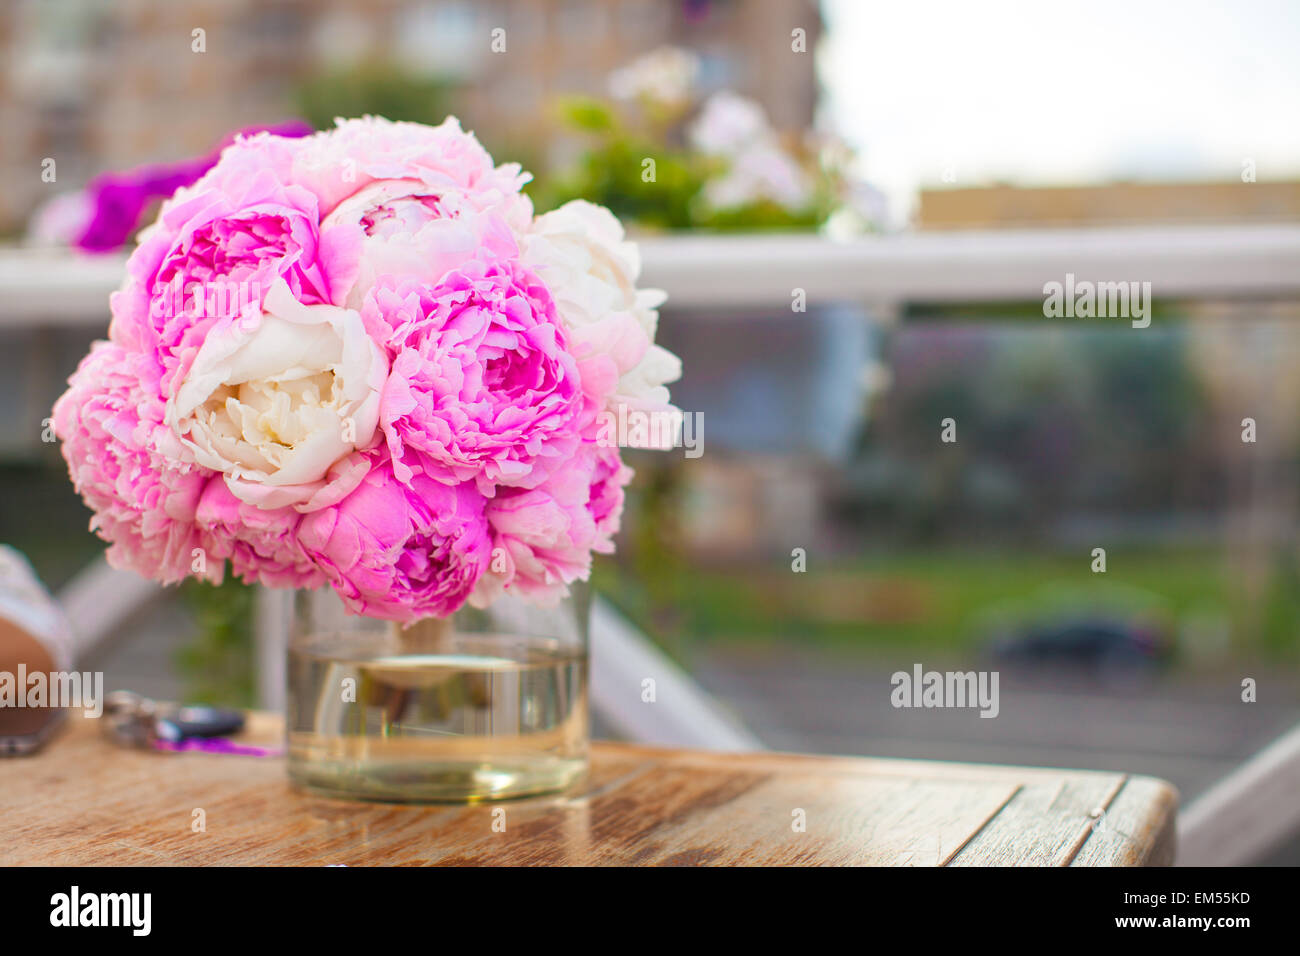 Charming bouquet of peonies in vase on table at restaurant Stock Photo